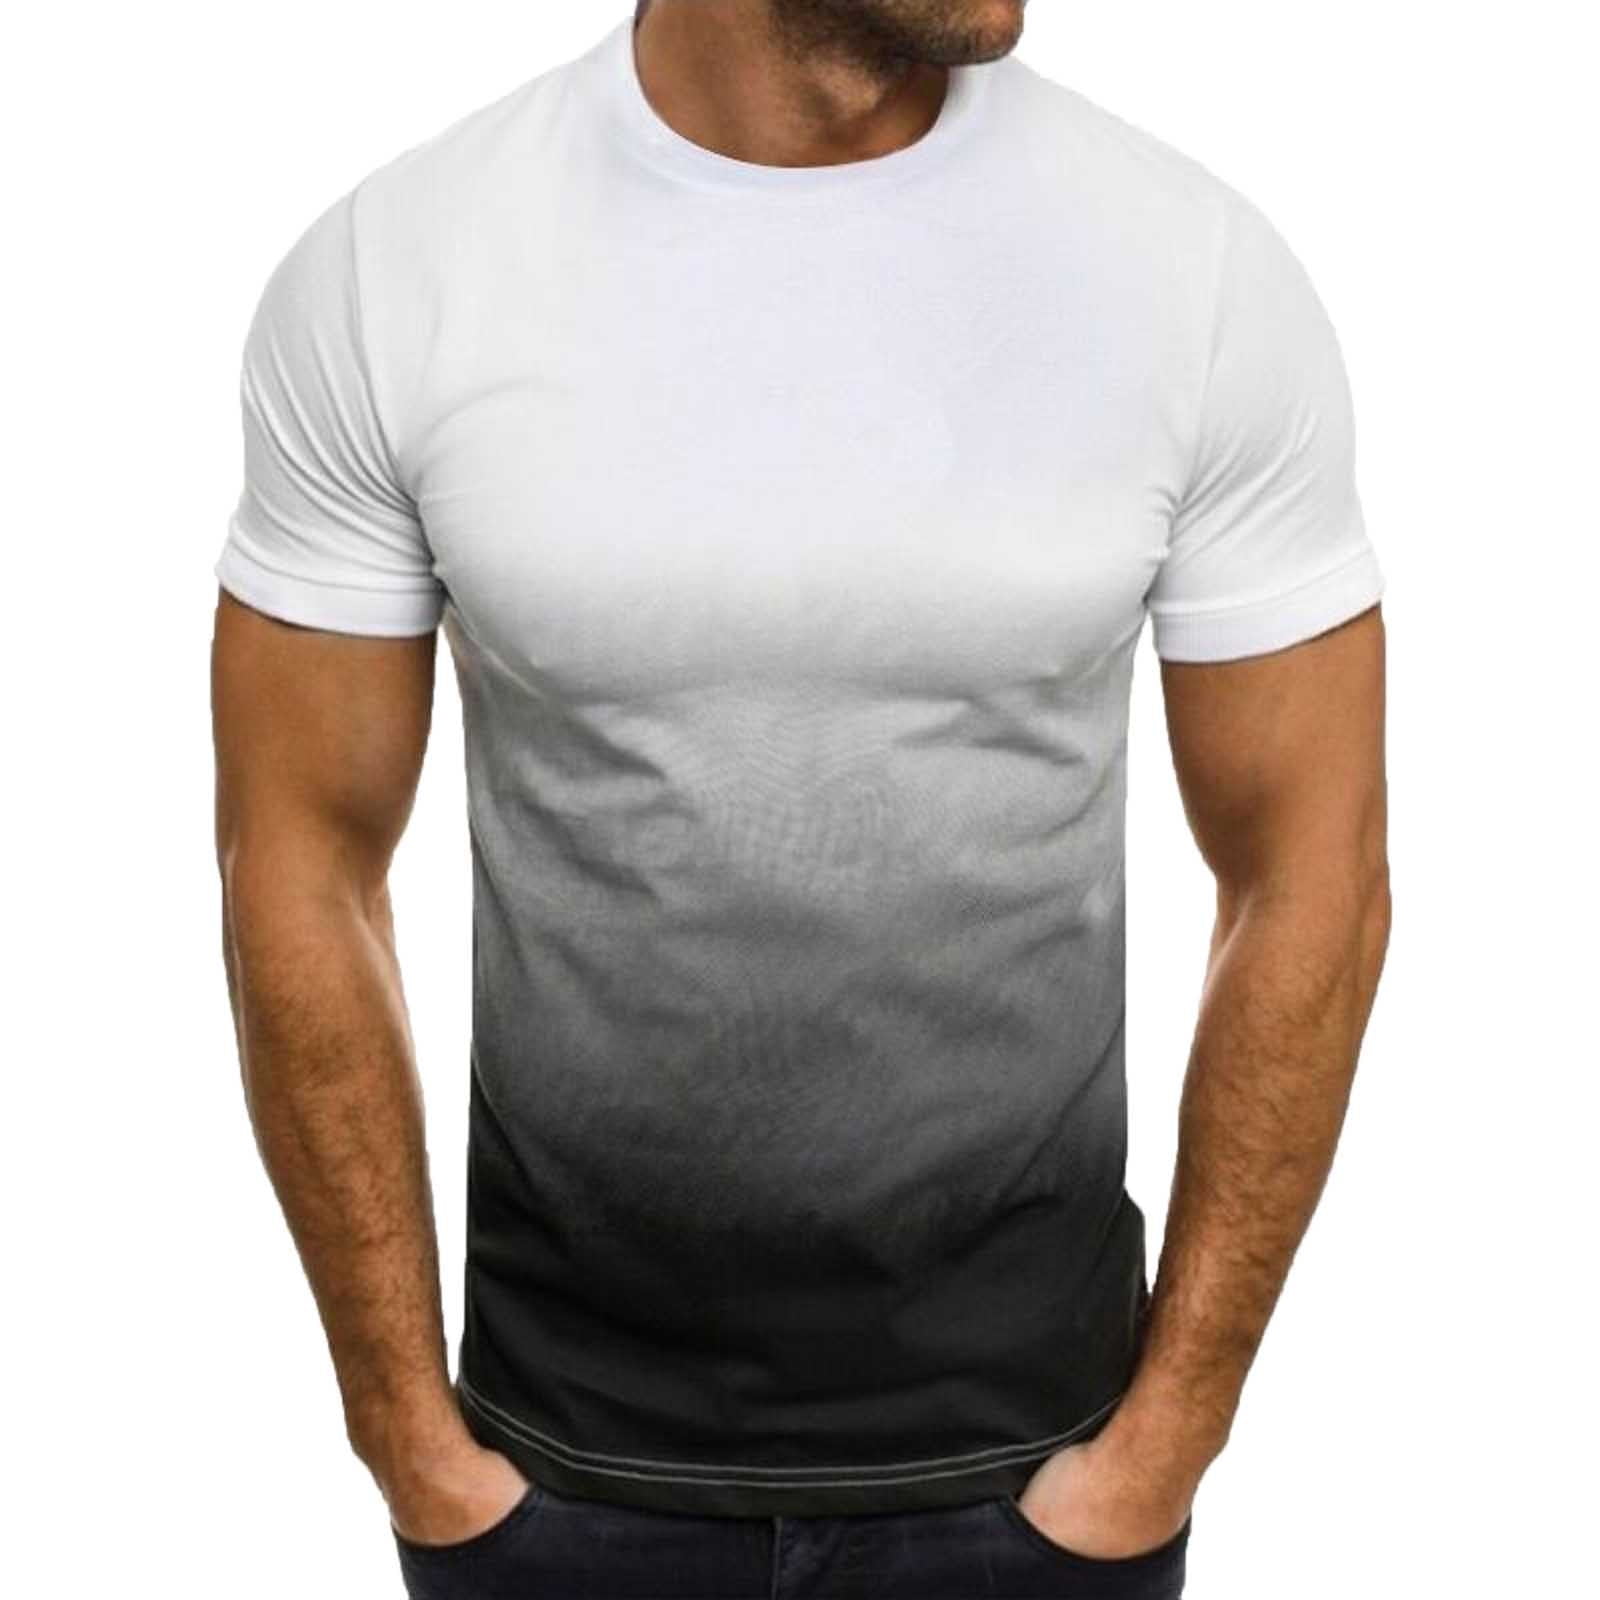 Homadles Soft Style T-Shirt for Men- Round Neck On Sale White Size L ...